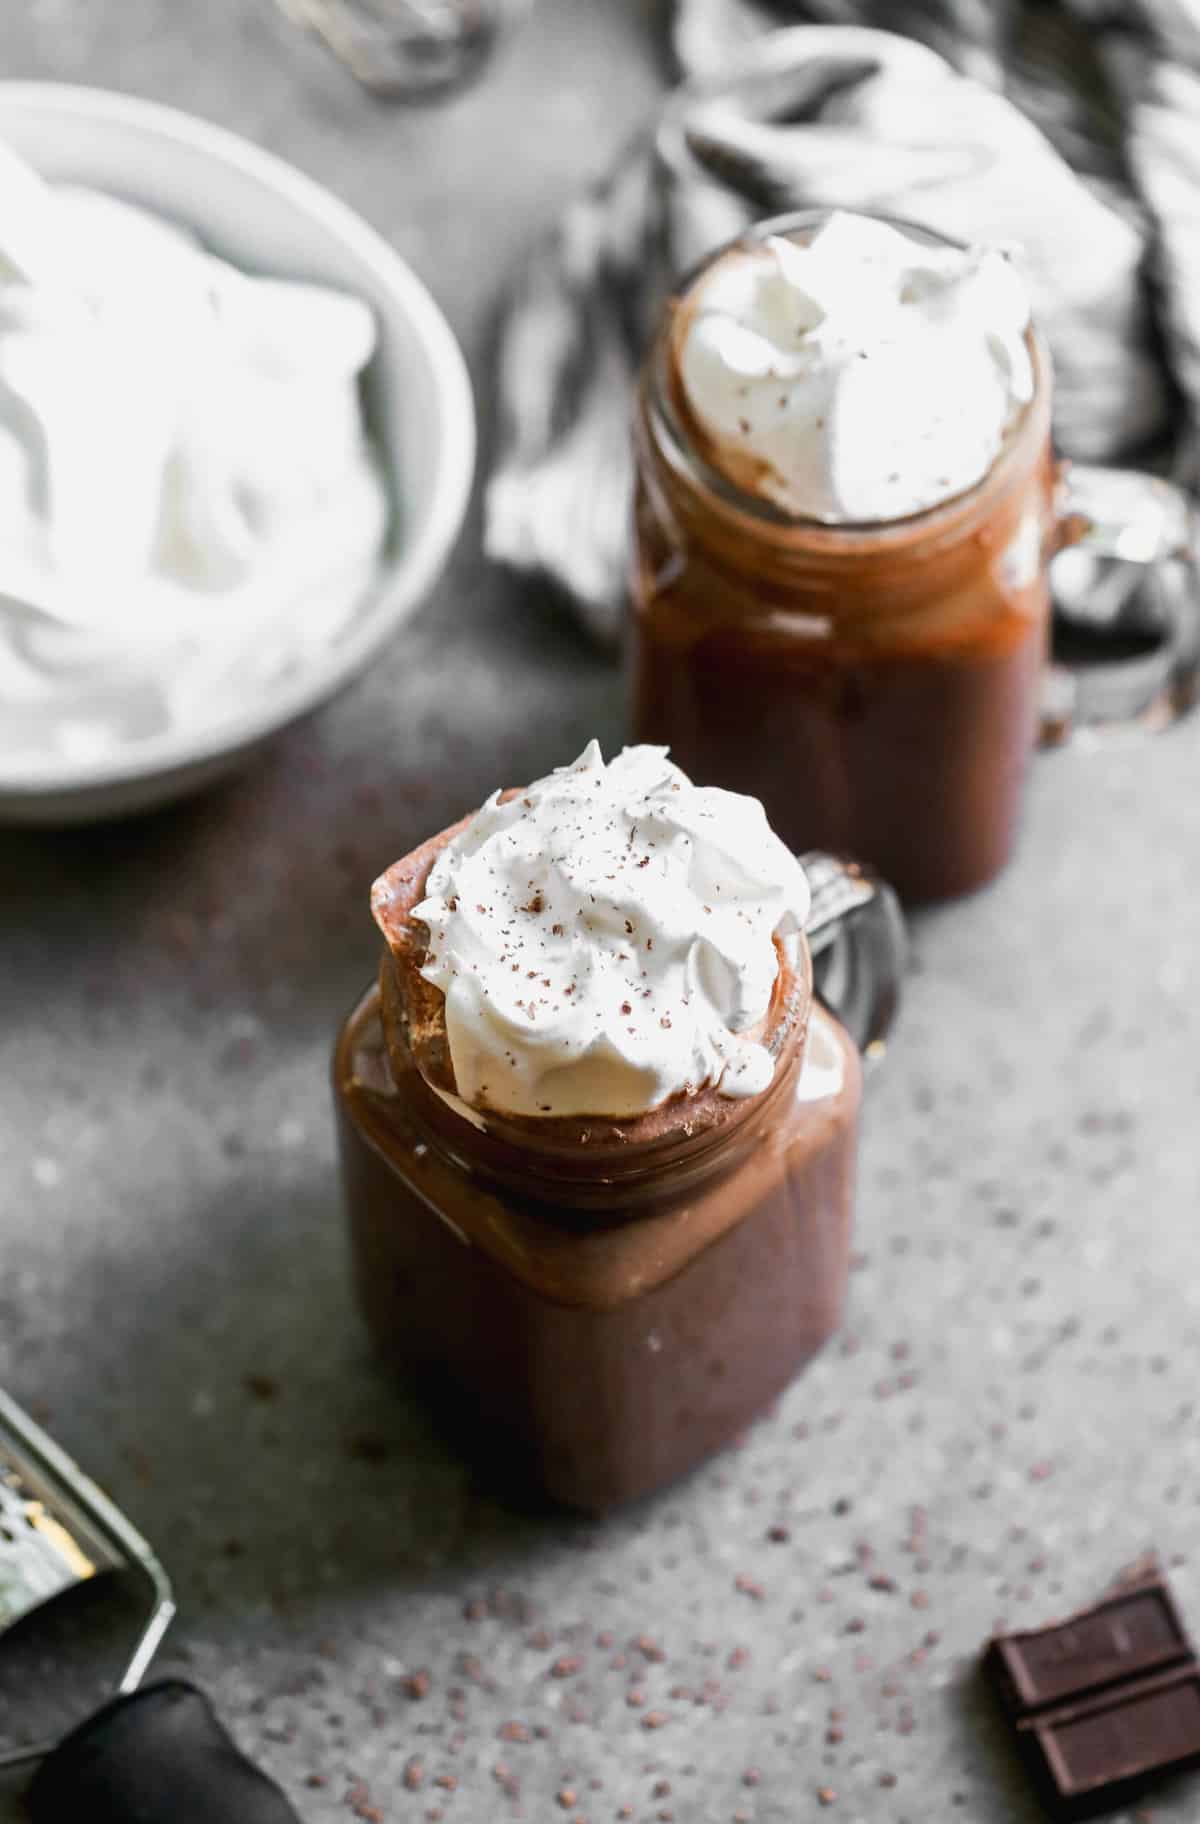 Two glass mugs filled with Creamy Hot Cocoa and topped with whipped cream and a dusting of cocoa powder.